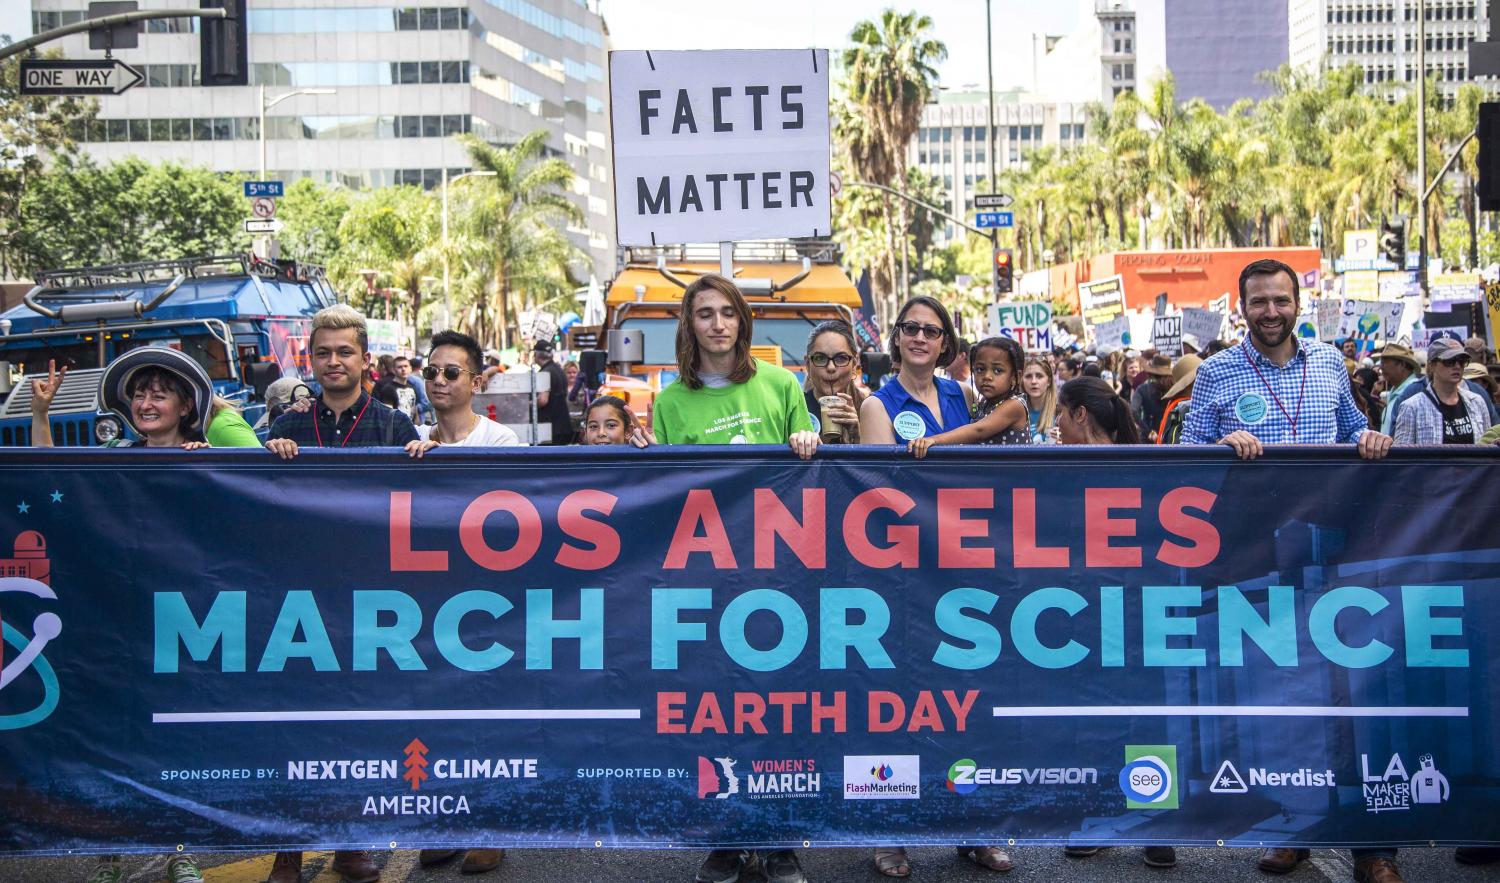  Science in Los Angeles to mark an annual event - Earth Day, which is celebrated worldwide on April 22. The demonstration started at Pershing Square and headed to the city council, where speakers talked about the importance of scientific research. So